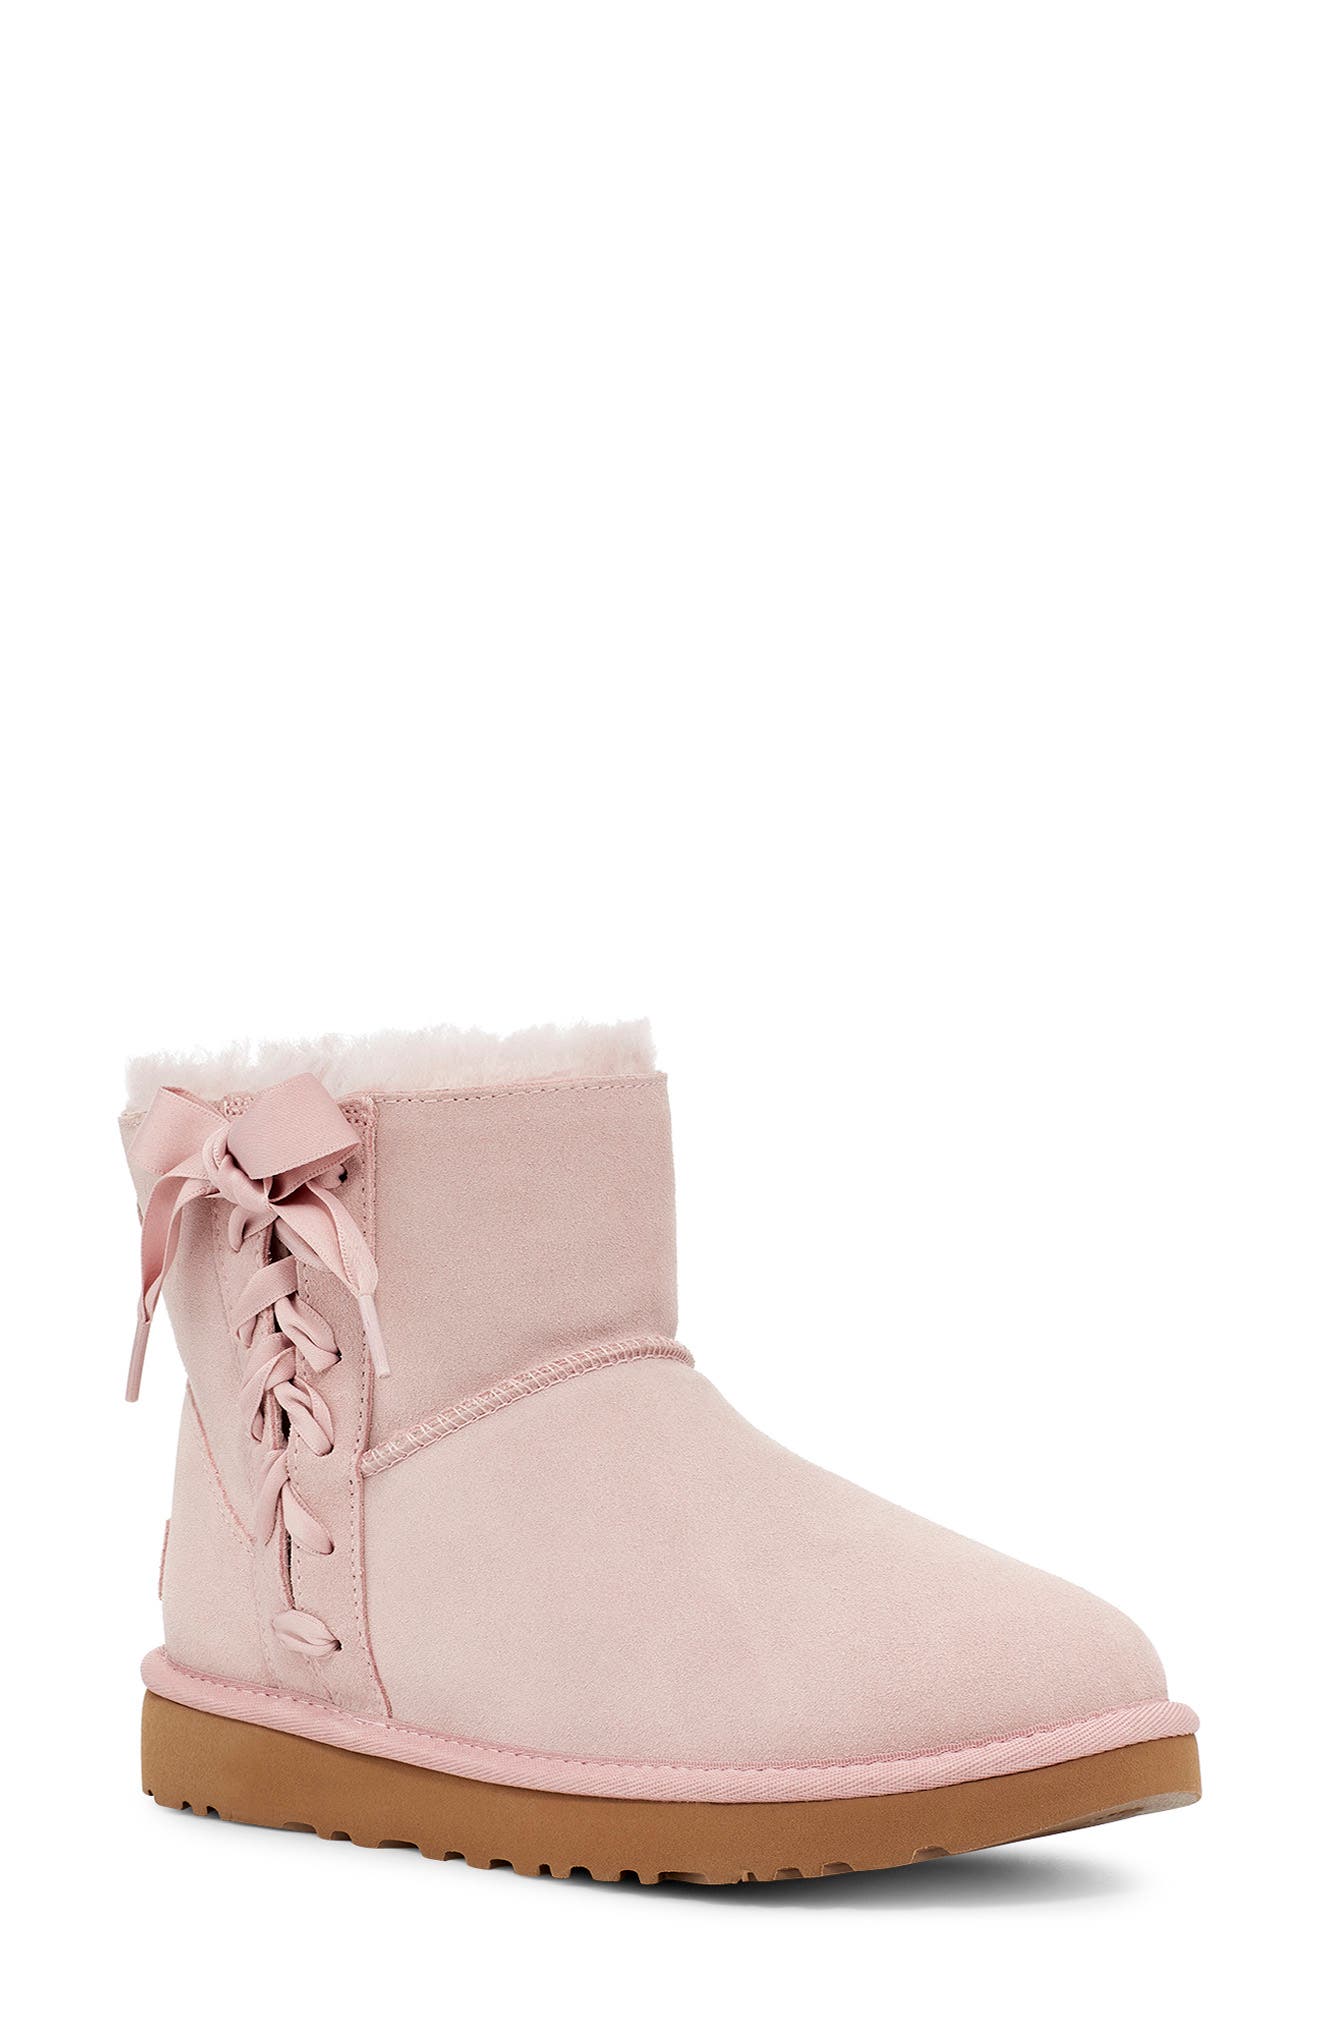 pink ugg lace up boots